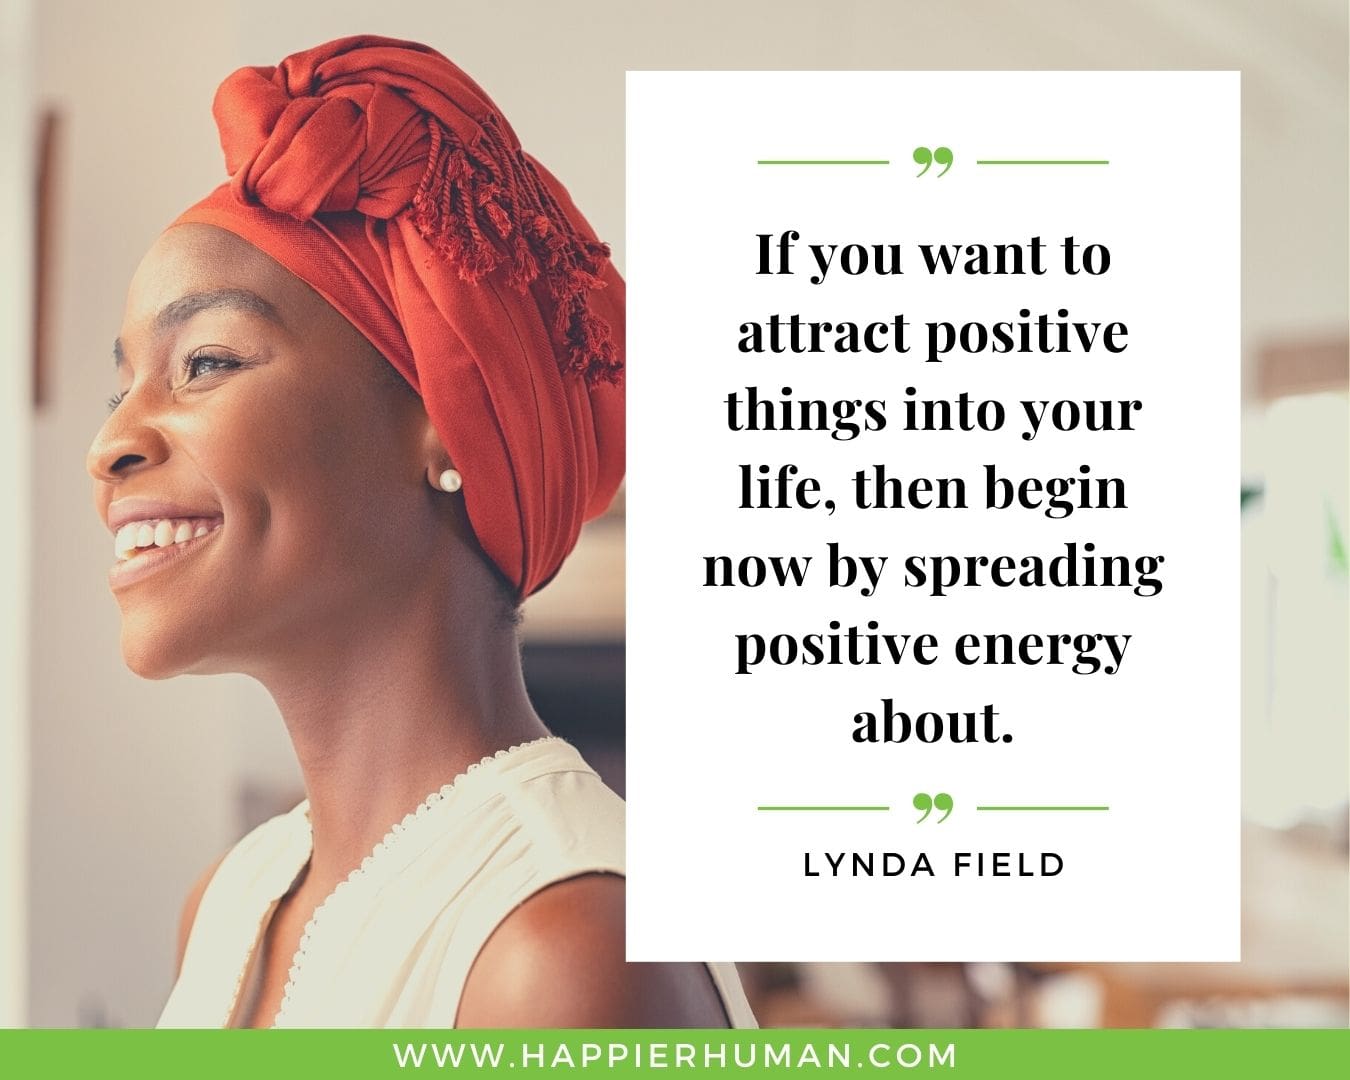 Positive Energy Quotes - “If you want to attract positive things into your life, then begin now by spreading positive energy about.” - Lynda Field